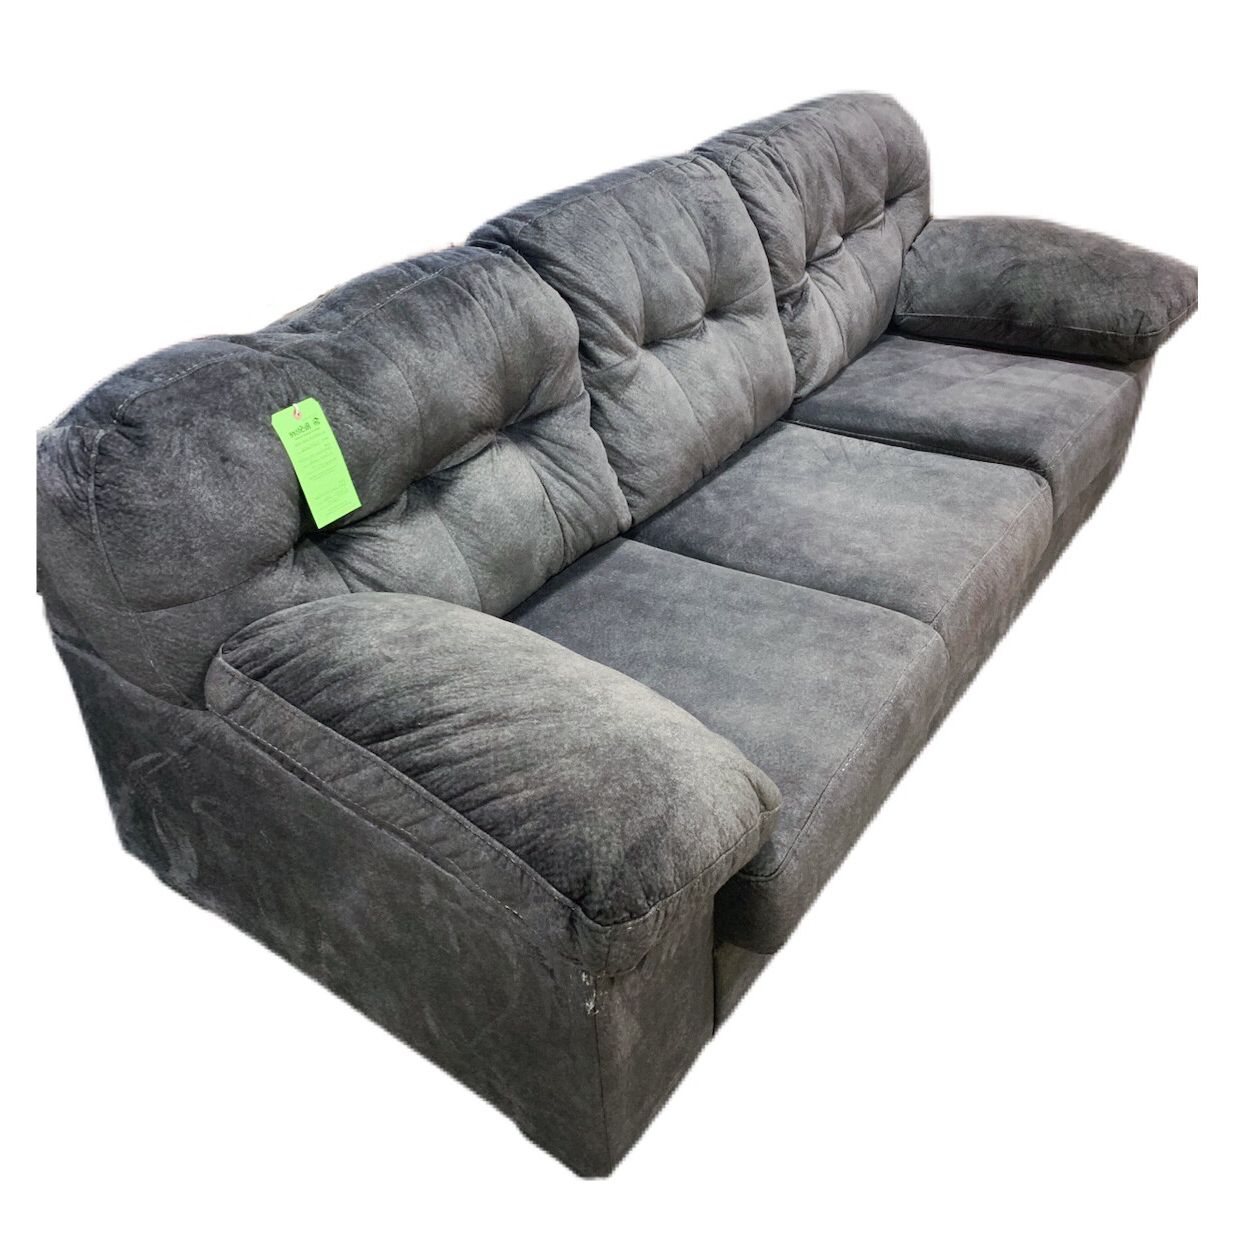 Dark Gray Microfiber 3 Seat Sofa Pertaining To Well Liked Dark Grey Polyester Sofa Couches (View 12 of 15)